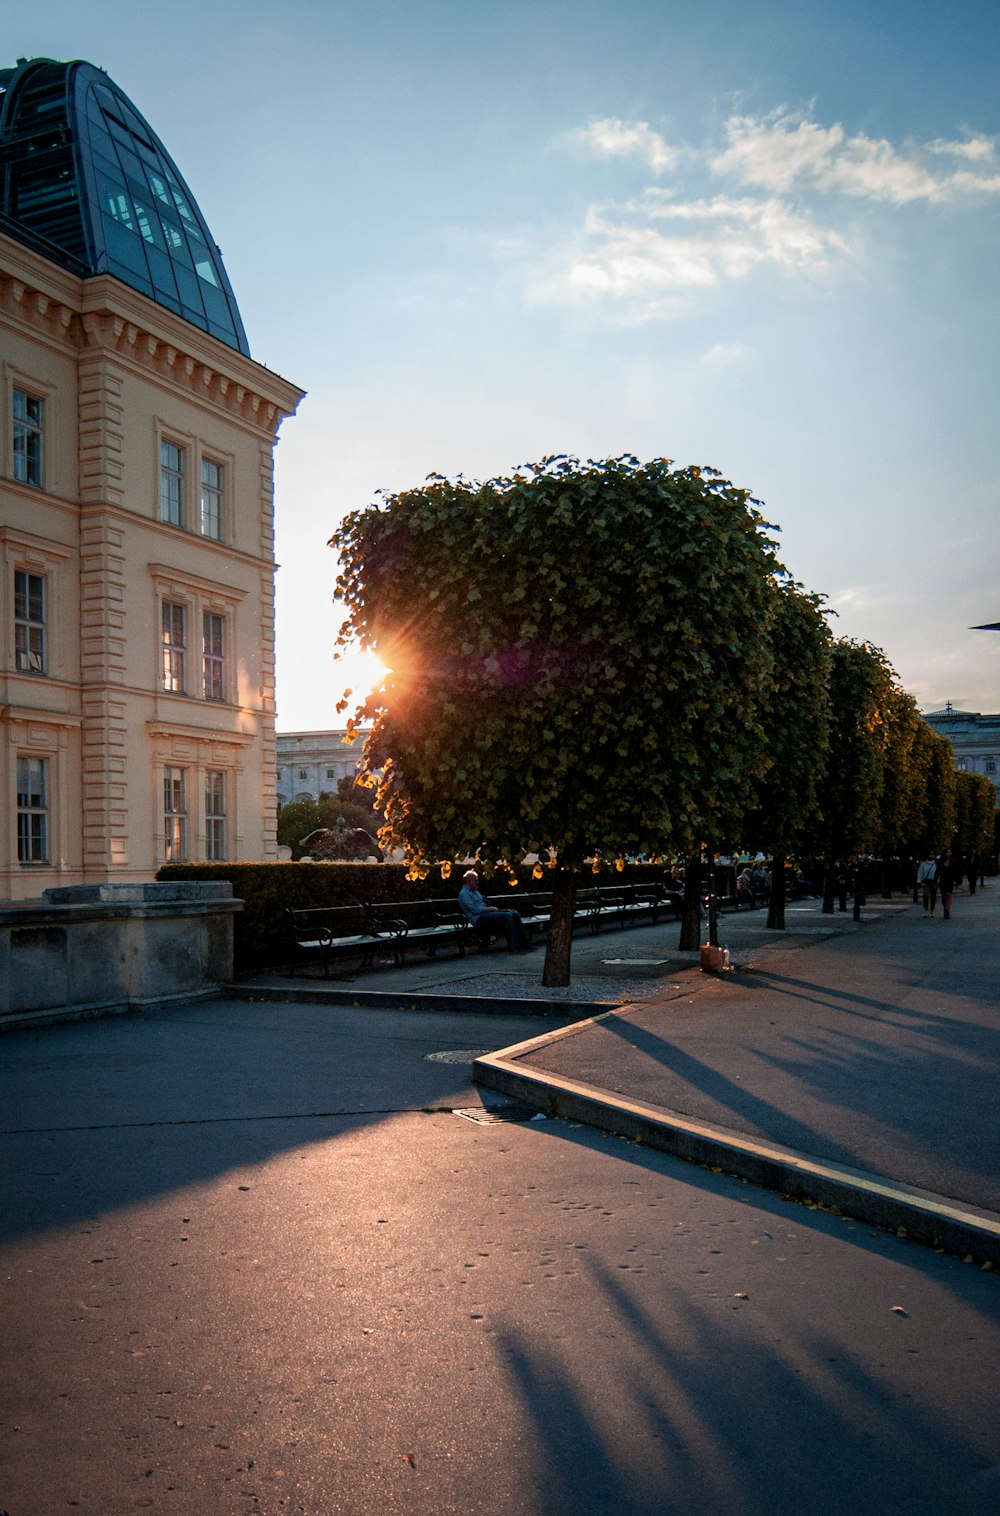 a tree in front of a building with a dome on top